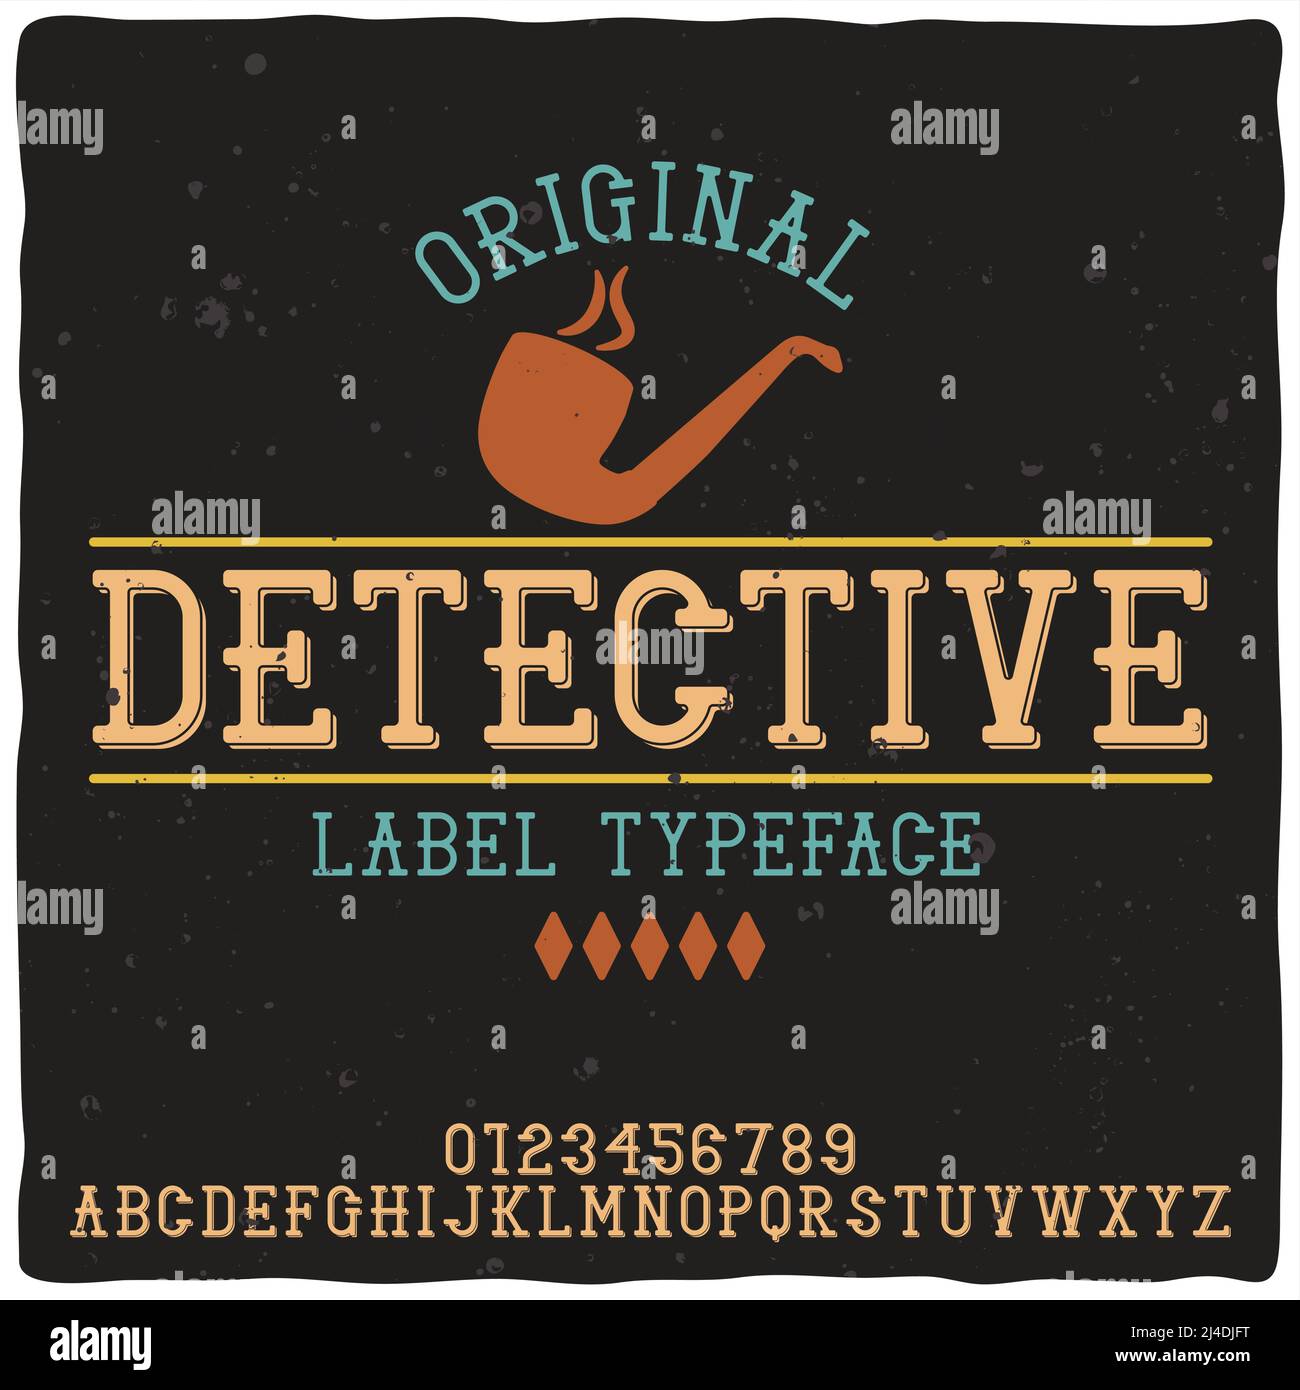 Vintage label typeface named 'Detective'. Good handcrafted font for any label design. Stock Vector